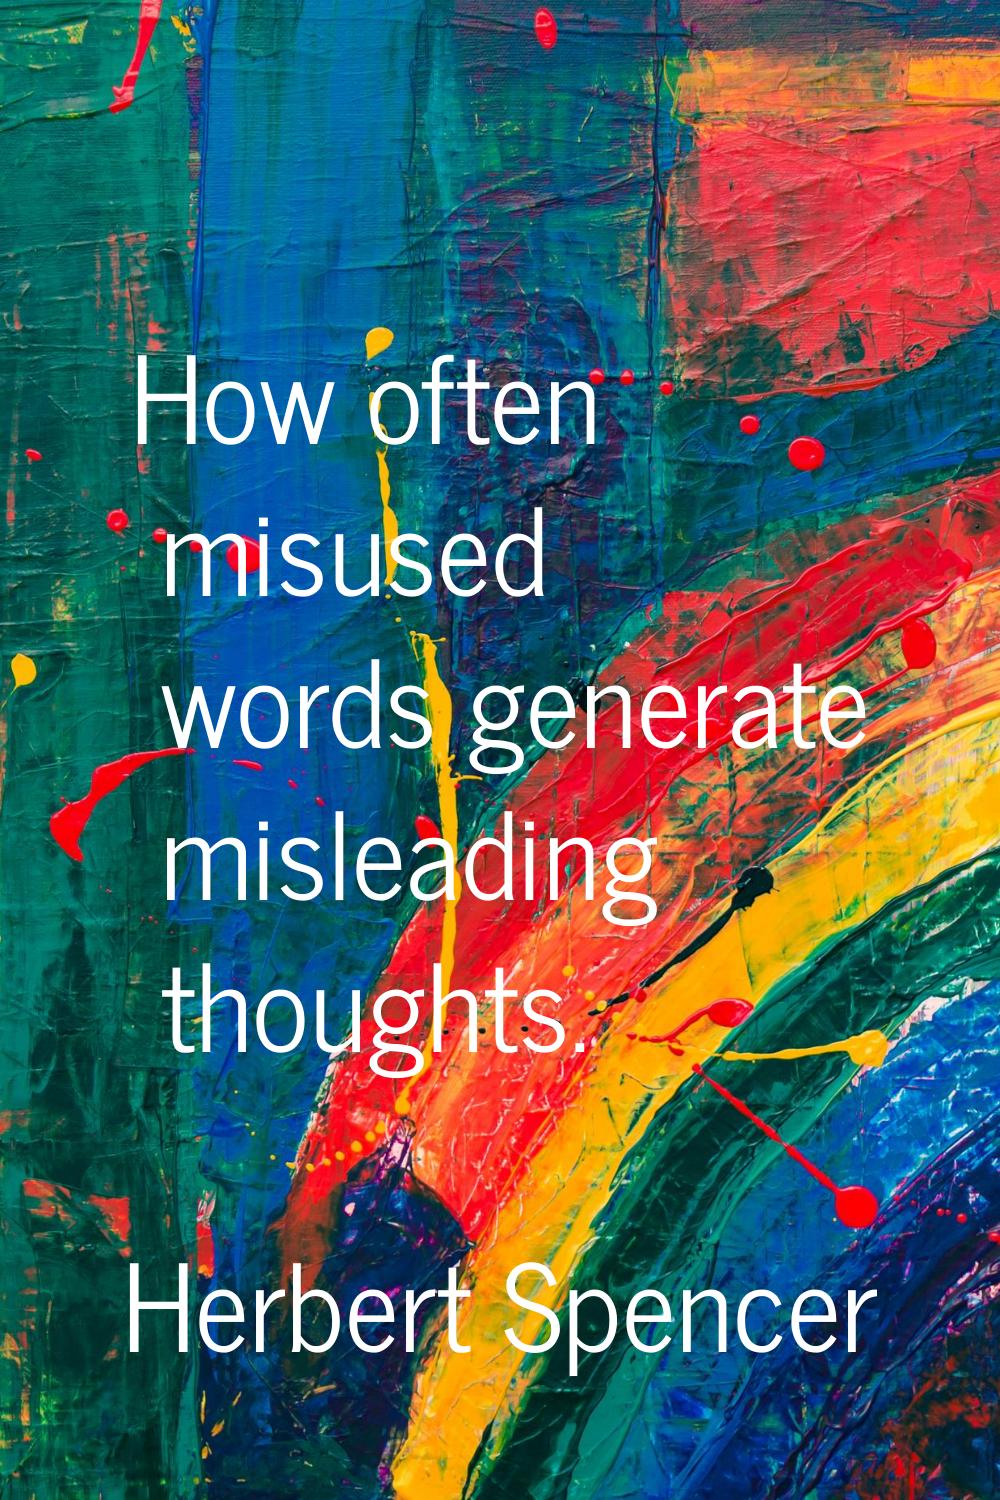 How often misused words generate misleading thoughts.